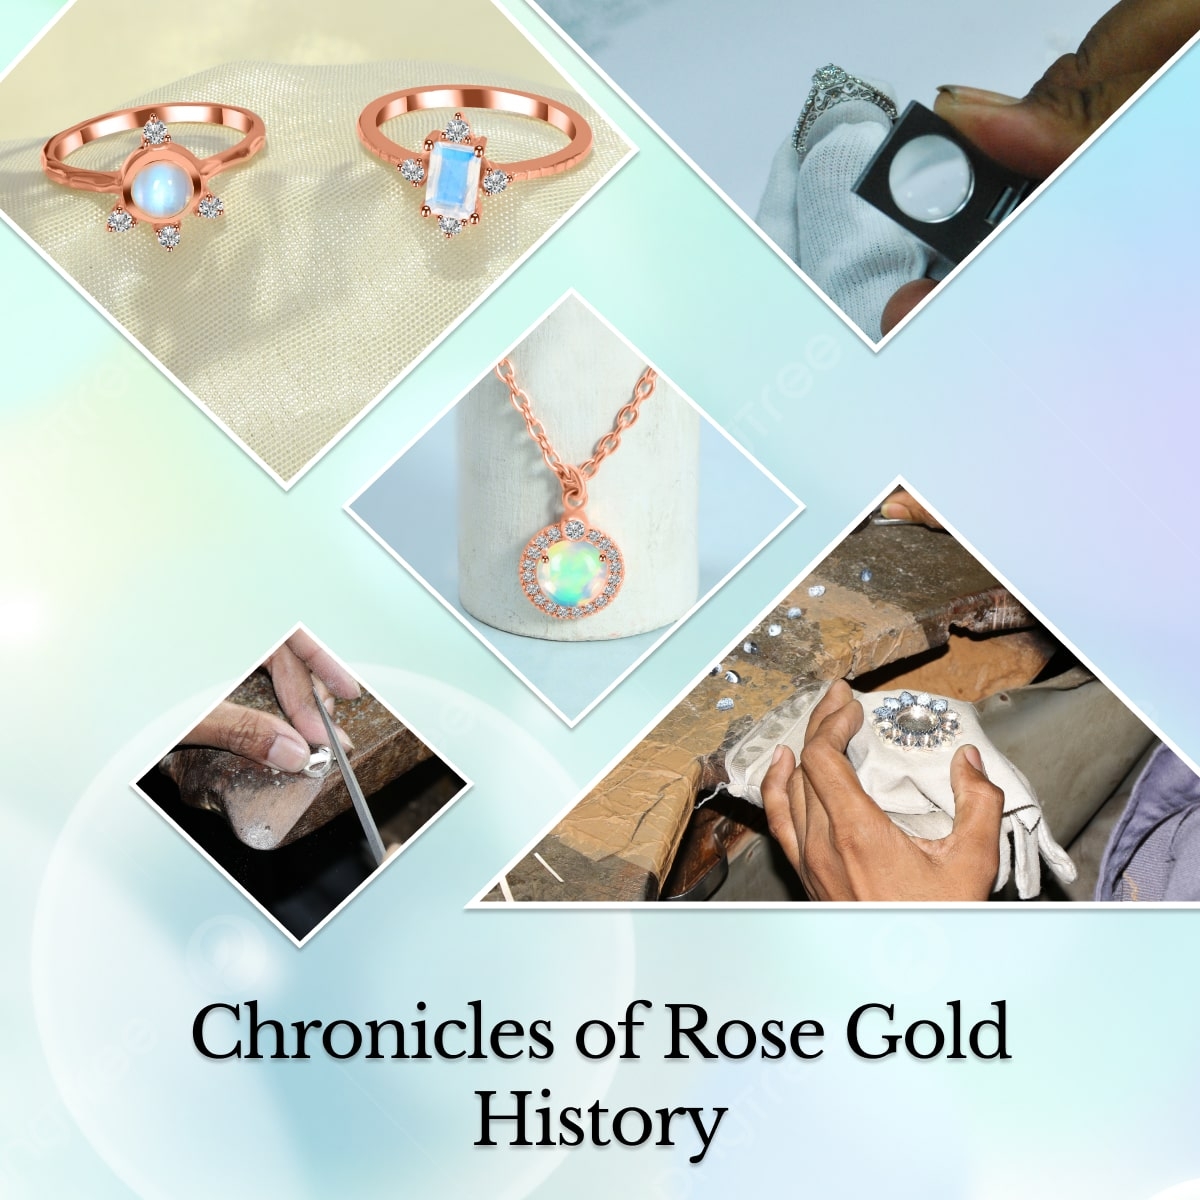 History of Rose Gold